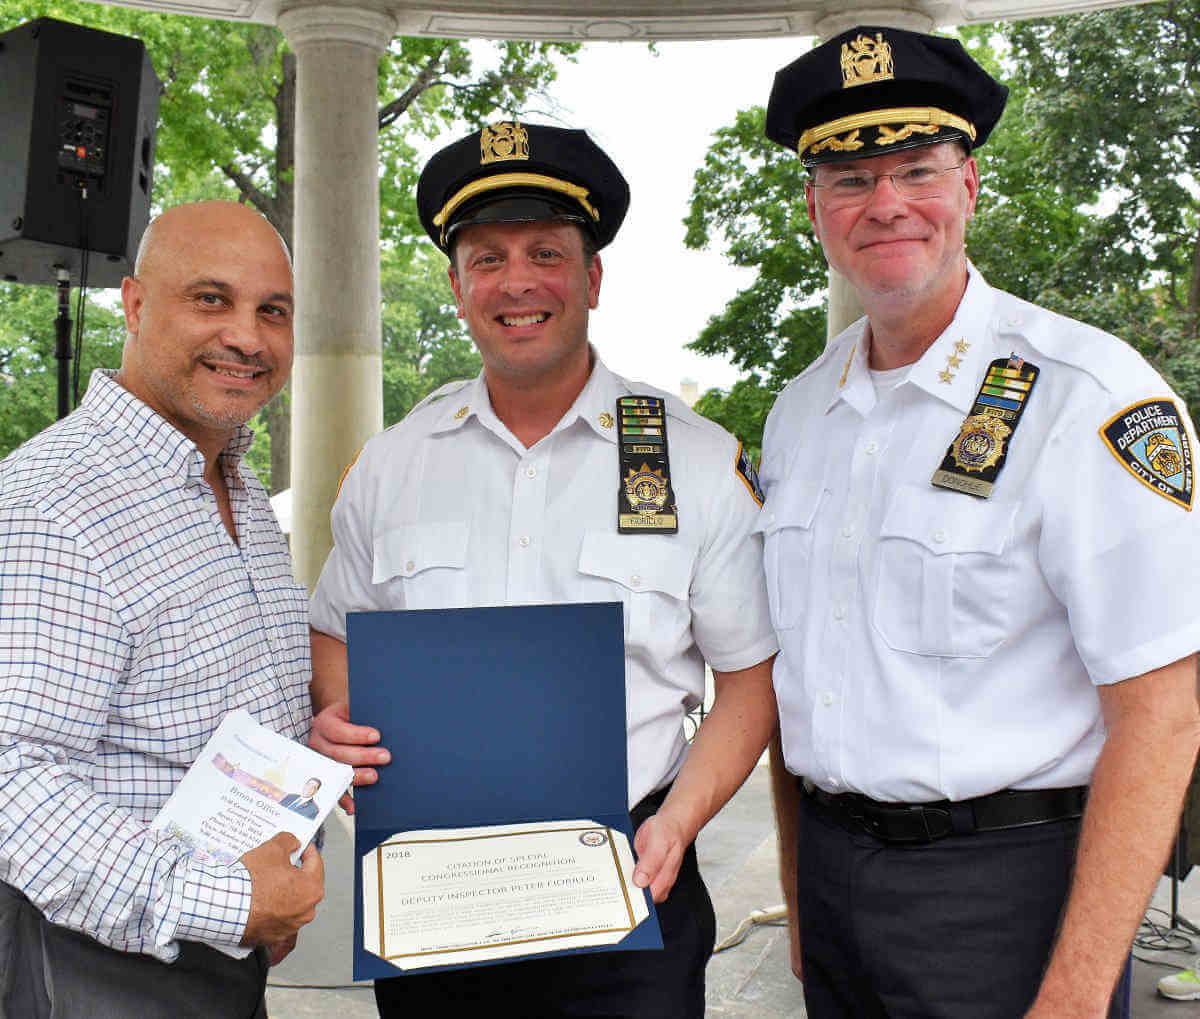 52nd Pct. Celebrates National Night Out Against Crime|52nd Pct. Celebrates National Night Out Against Crime|52nd Pct. Celebrates National Night Out Against Crime|52nd Pct. Celebrates National Night Out Against Crime|52nd Pct. Celebrates National Night Out Against Crime|52nd Pct. Celebrates National Night Out Against Crime